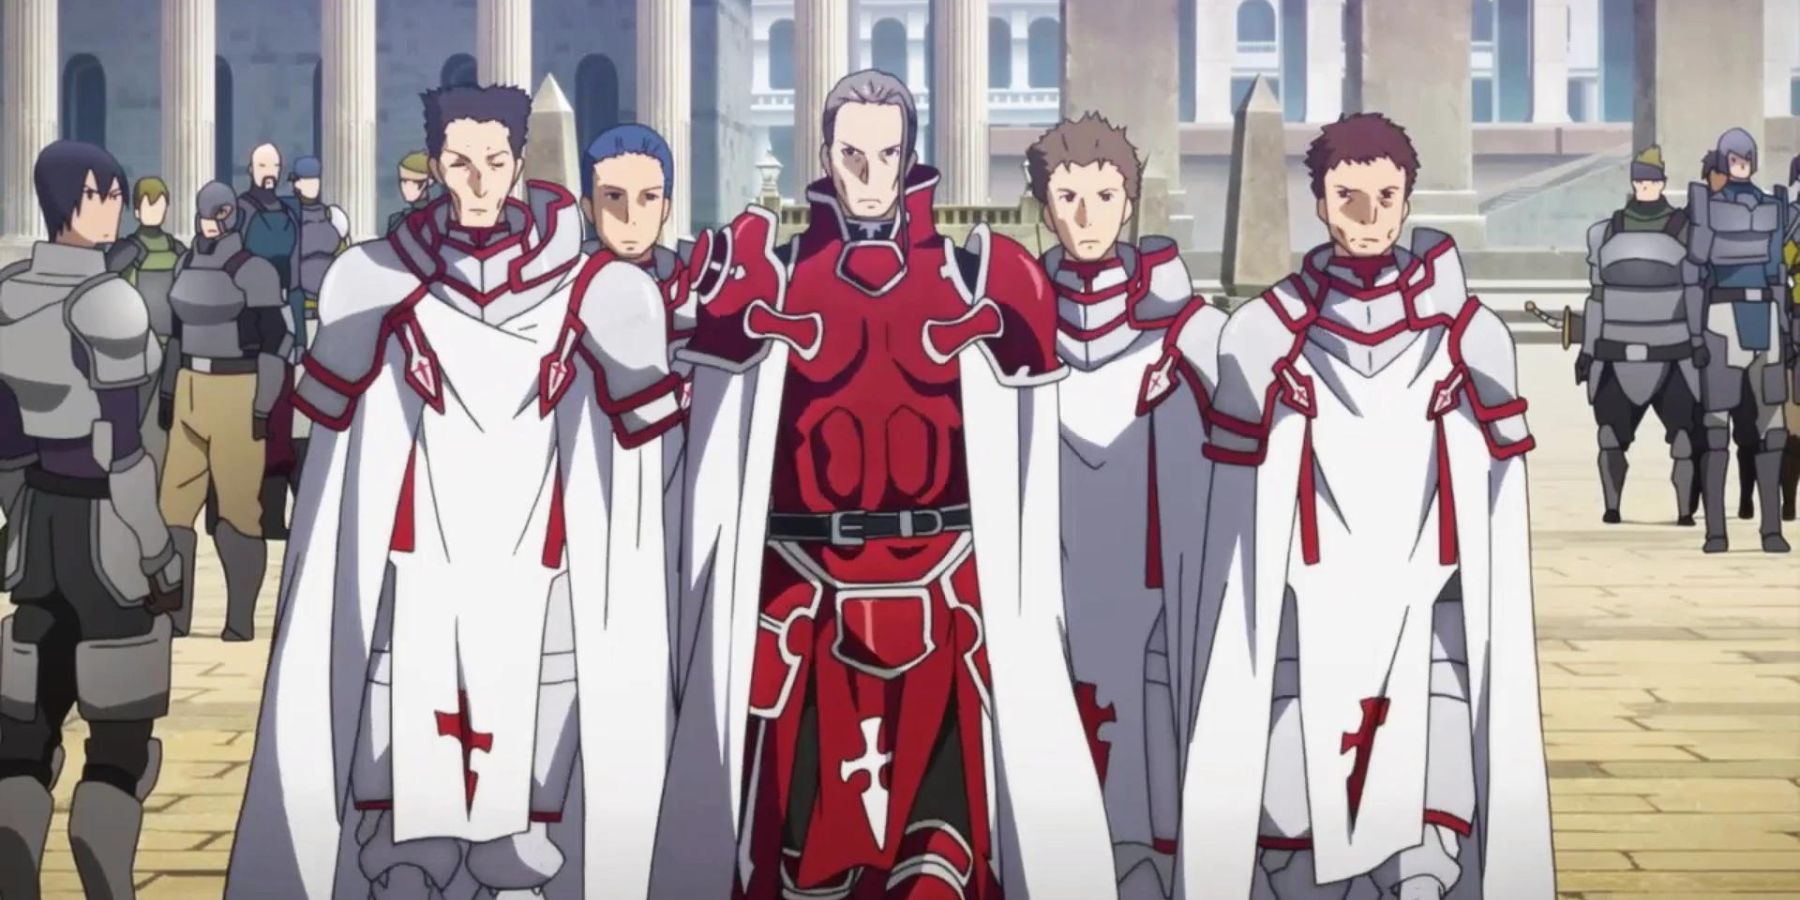 Heathcliff The Knights Of The Blood (Sword Art Online)